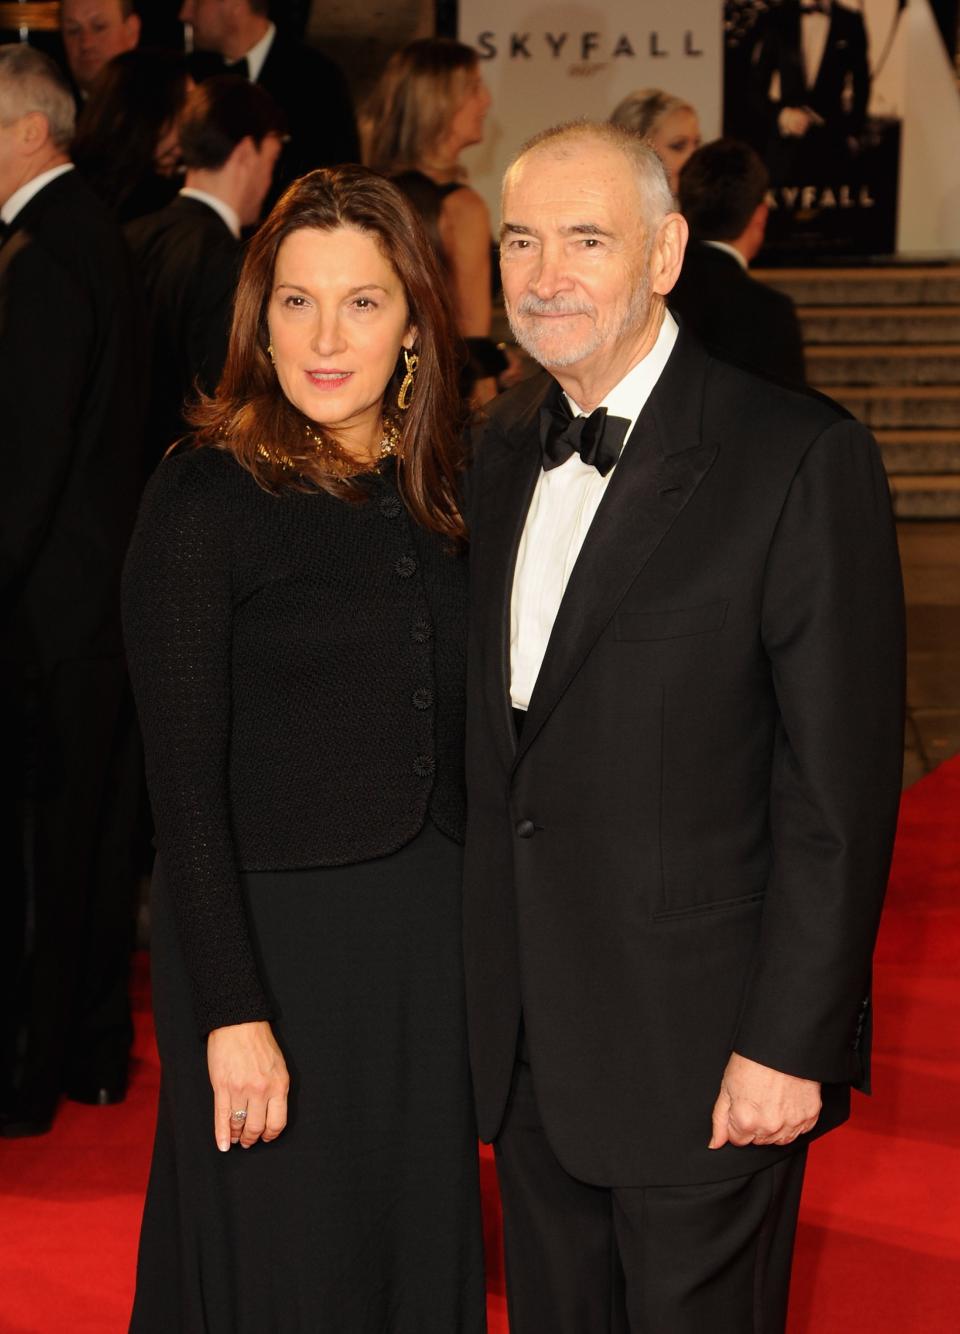 LONDON, ENGLAND - OCTOBER 23: Producers Barbara Broccoli and Michael G. Wilson attend the Royal World Premiere of 'Skyfall' at the Royal Albert Hall on October 23, 2012 in London, England. (Photo by Eamonn McCormack/Getty Images)